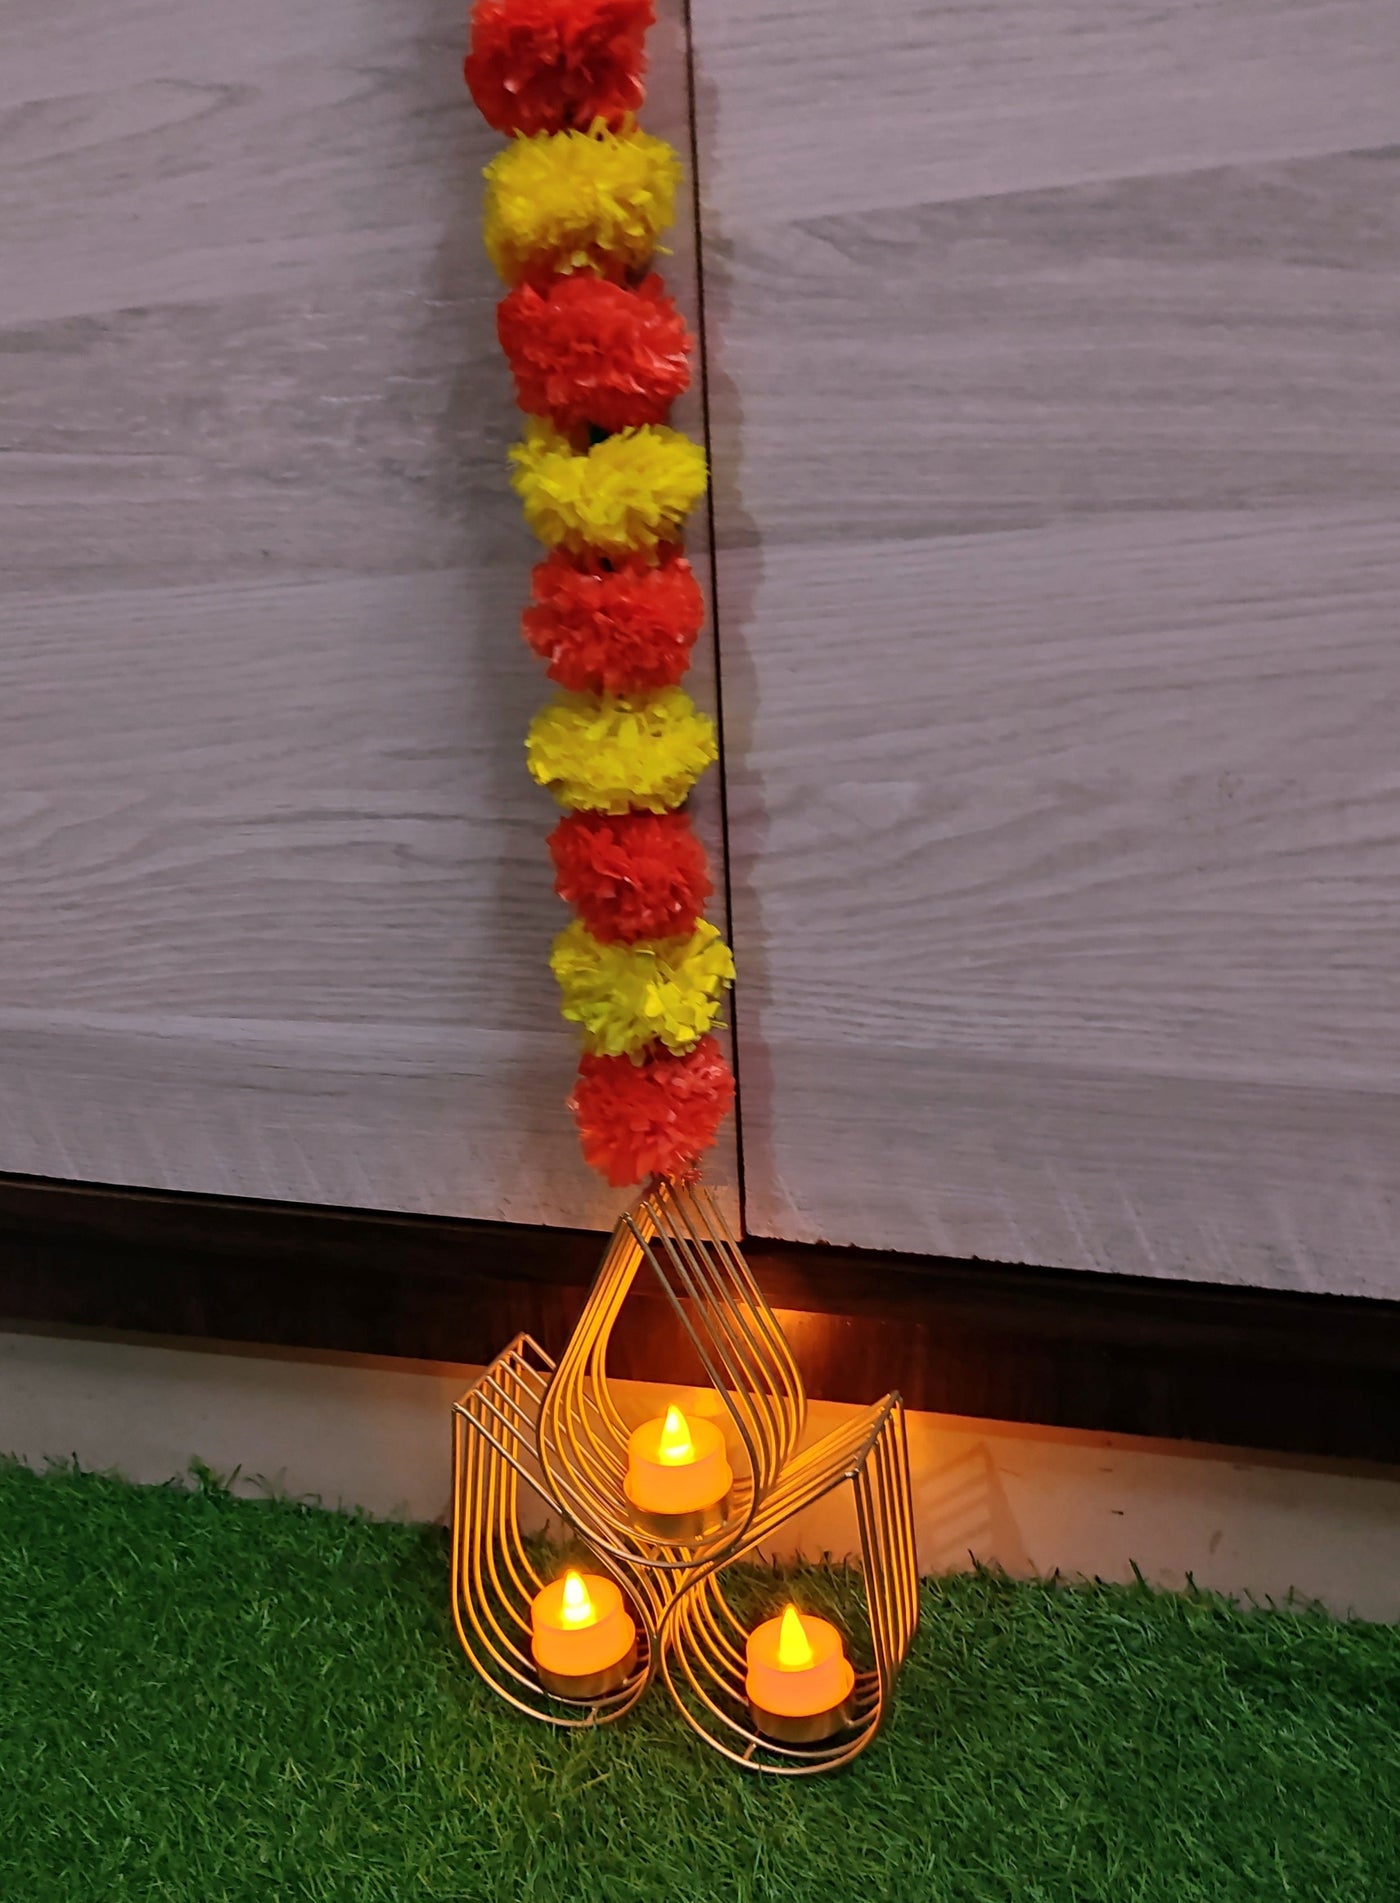 Lamansh hanging candle holder 5 LAMANSH® ( Pack of 5 , 5 feet Height ) Gold Plated Candle Holder attached to Marigold Garland hanging / Wall Hanging Metal Wall Candle holder for Diwali Lighting Home Decoration / Ganpati Mandap & Pooja Wall decoration